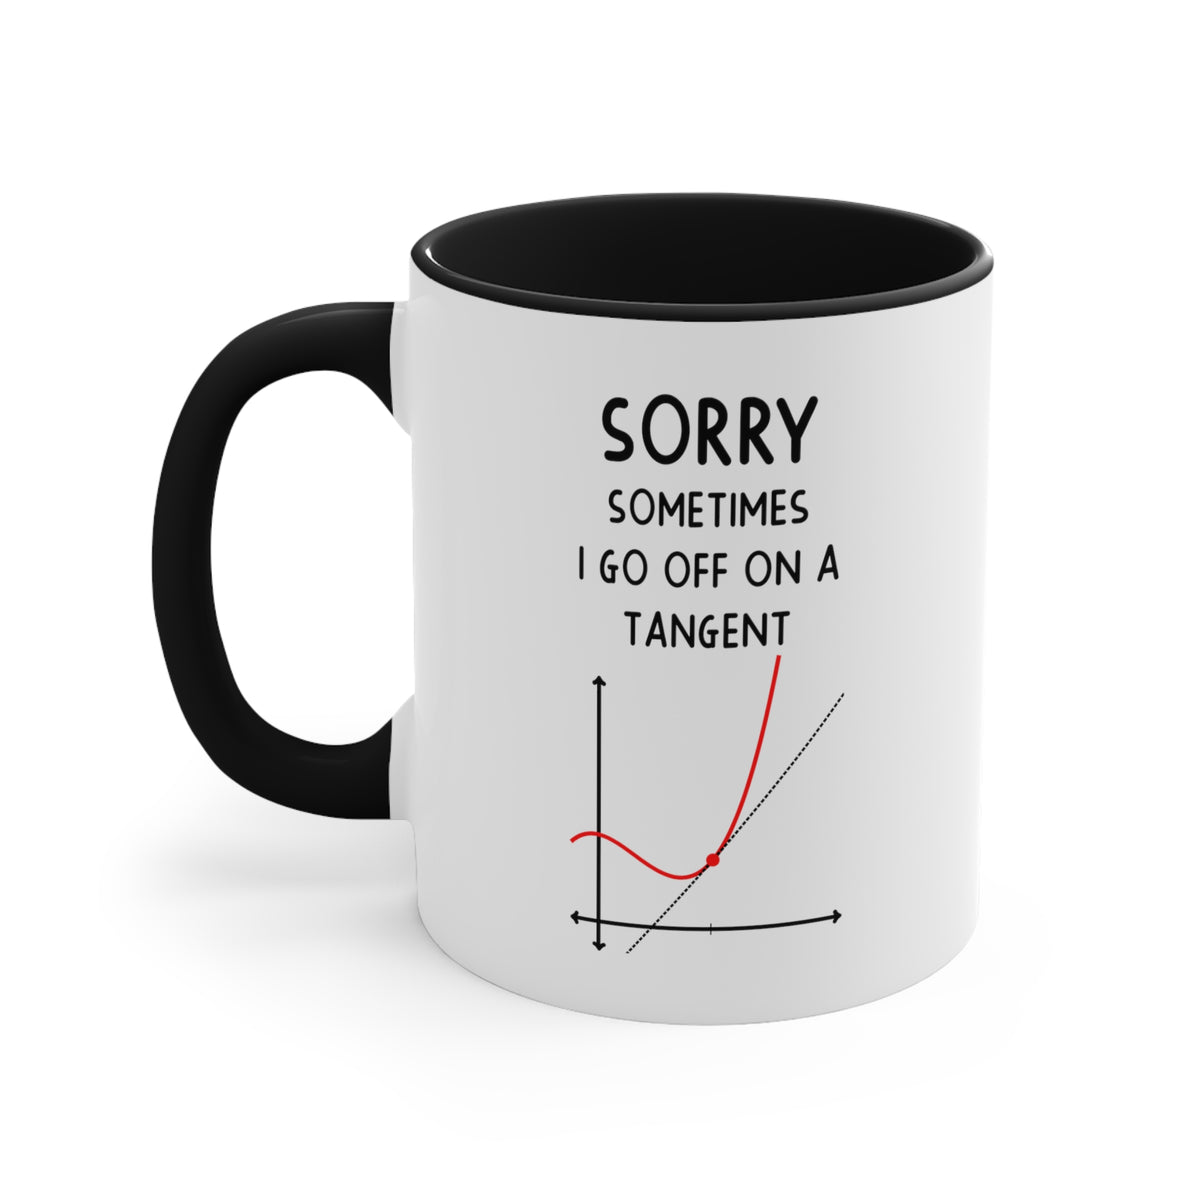 Funny Engineer Two Tone Mug, Sorry Sometimes I Go Off On A Tangent, Best For Engineering Student, Computer Chemical Engineer, Men Women